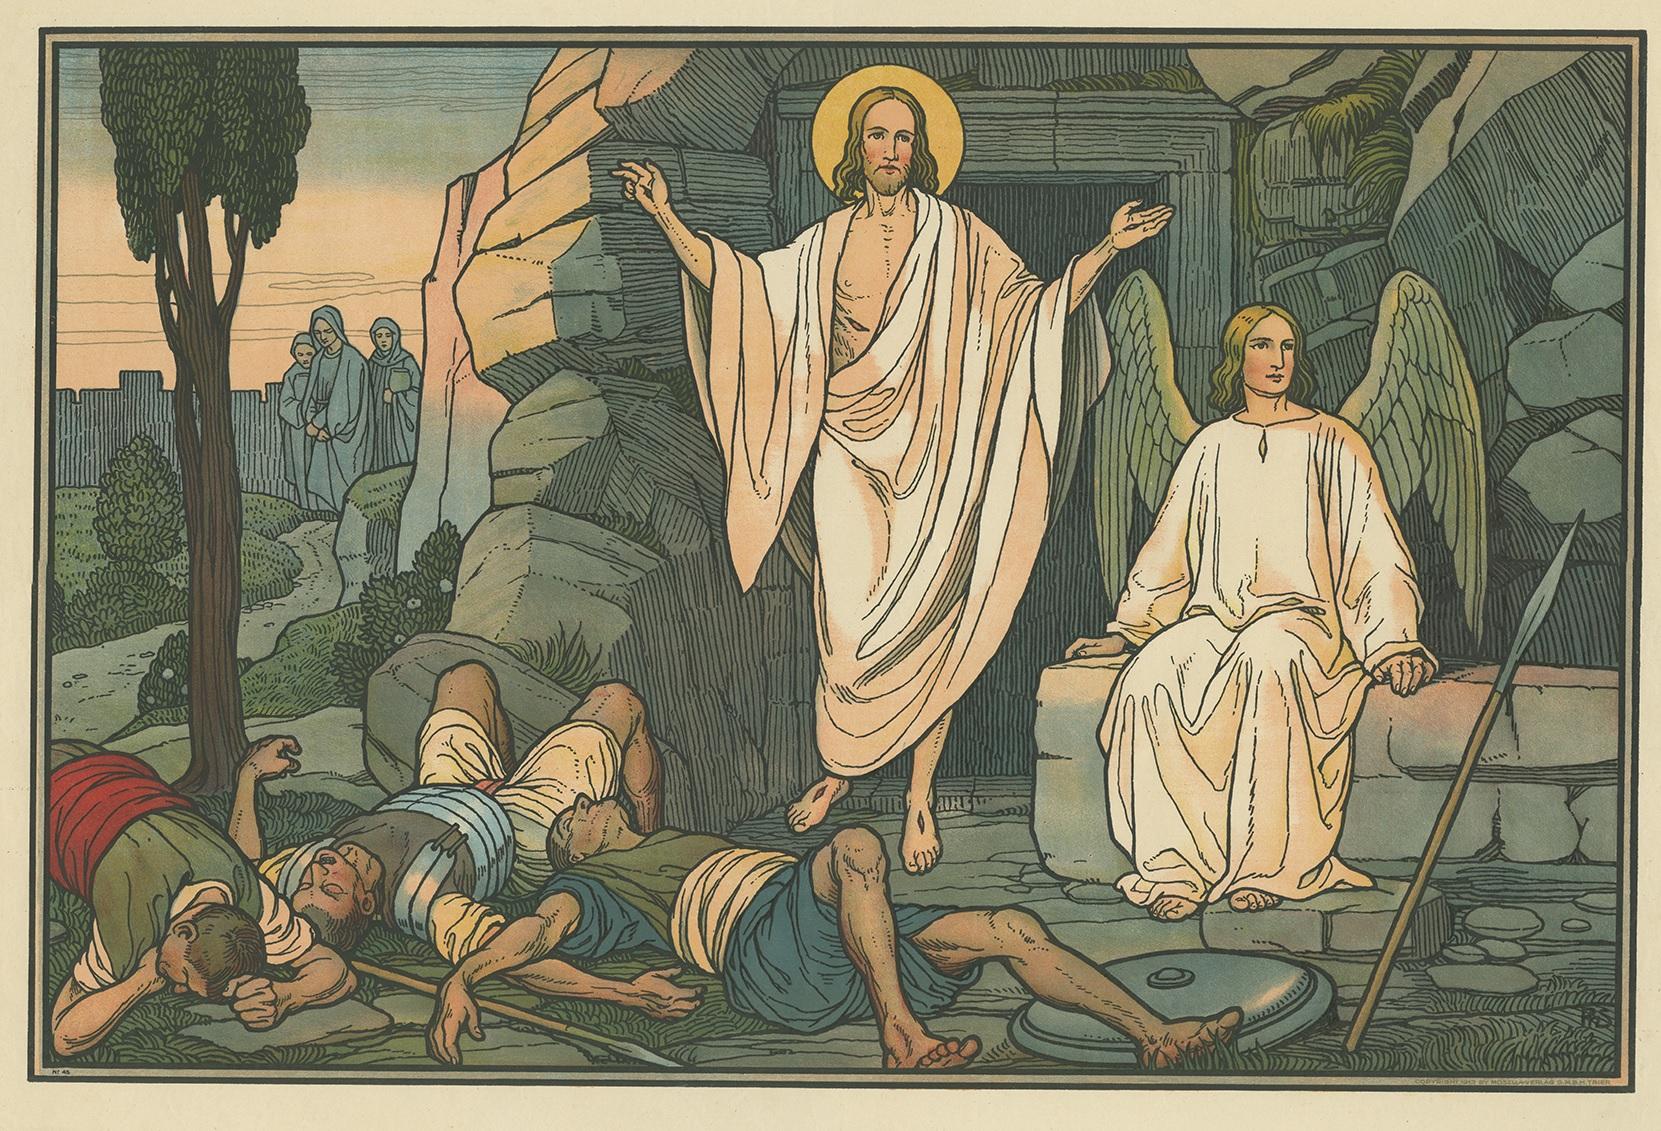 Large antique print of the Resurrection of Jesus. Published by Mosella-Verlag, 1913. This print originates from a series titled 'Kathol. Schulbibelwerk von Dr. Ecker'.